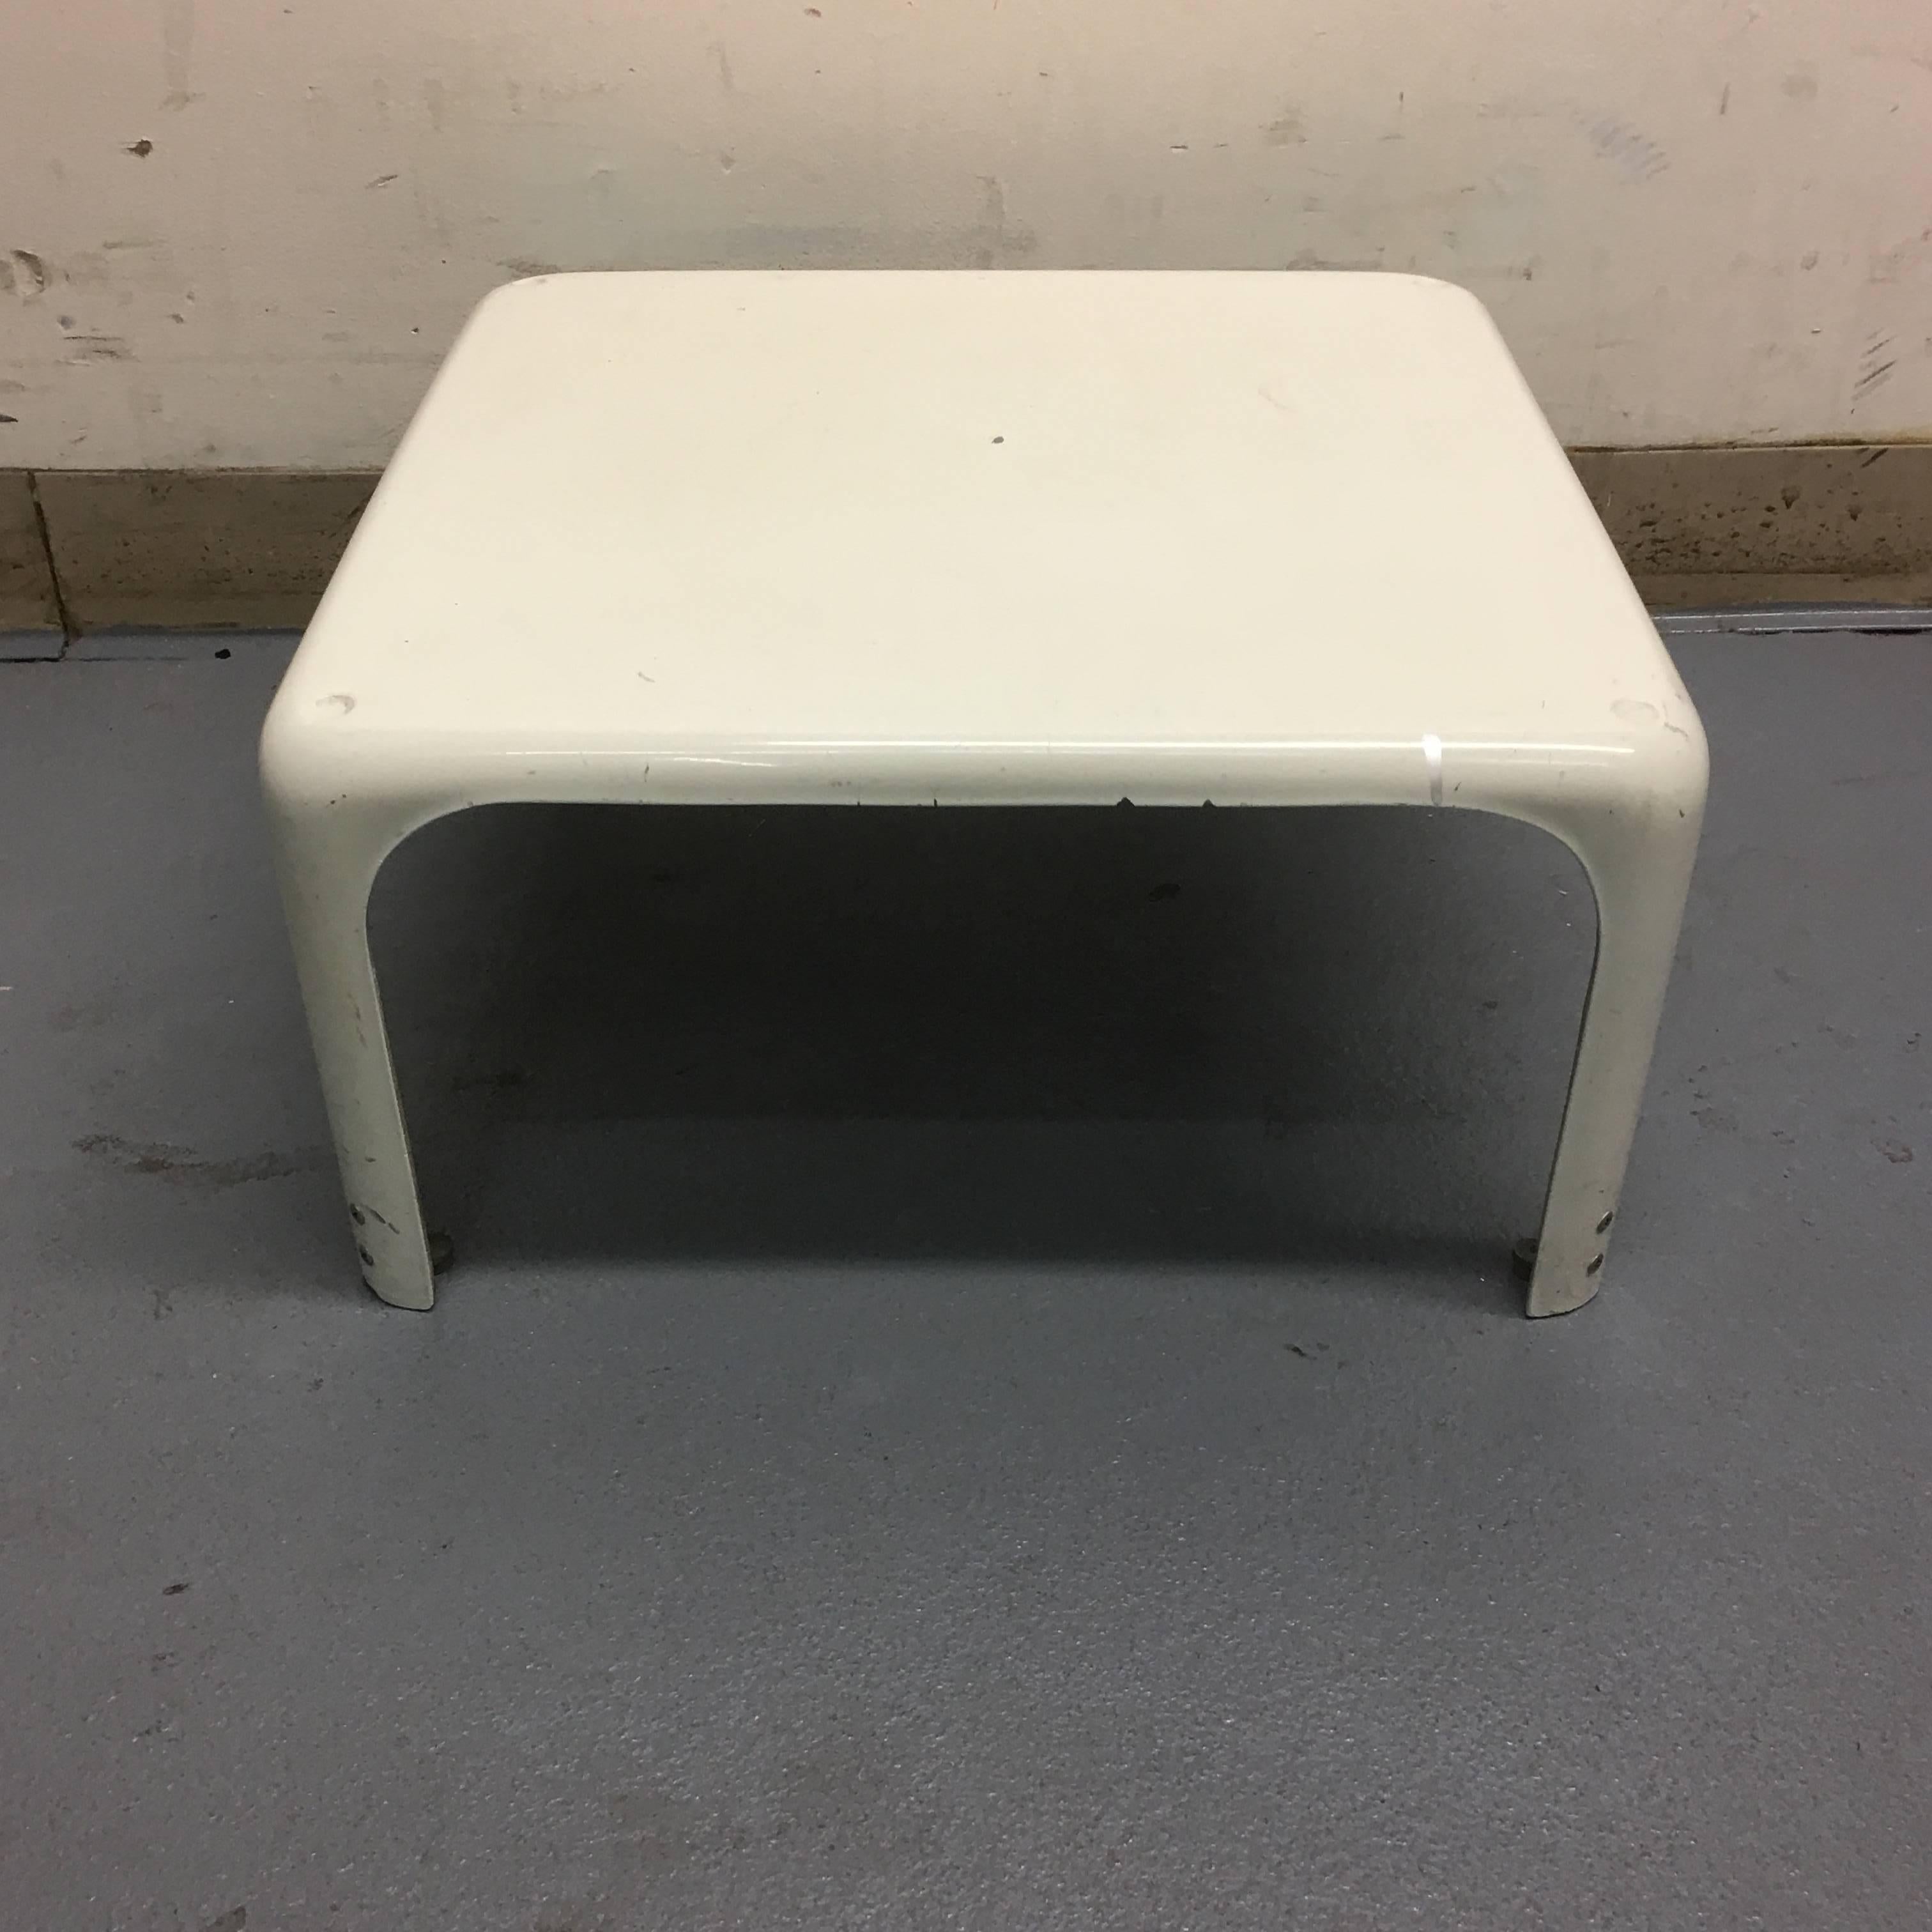 Demetrio 45 side table by Vico Magistretti for Artemide. Plastic/fiberglass. In good vintage condition with normal wear. No cracks.